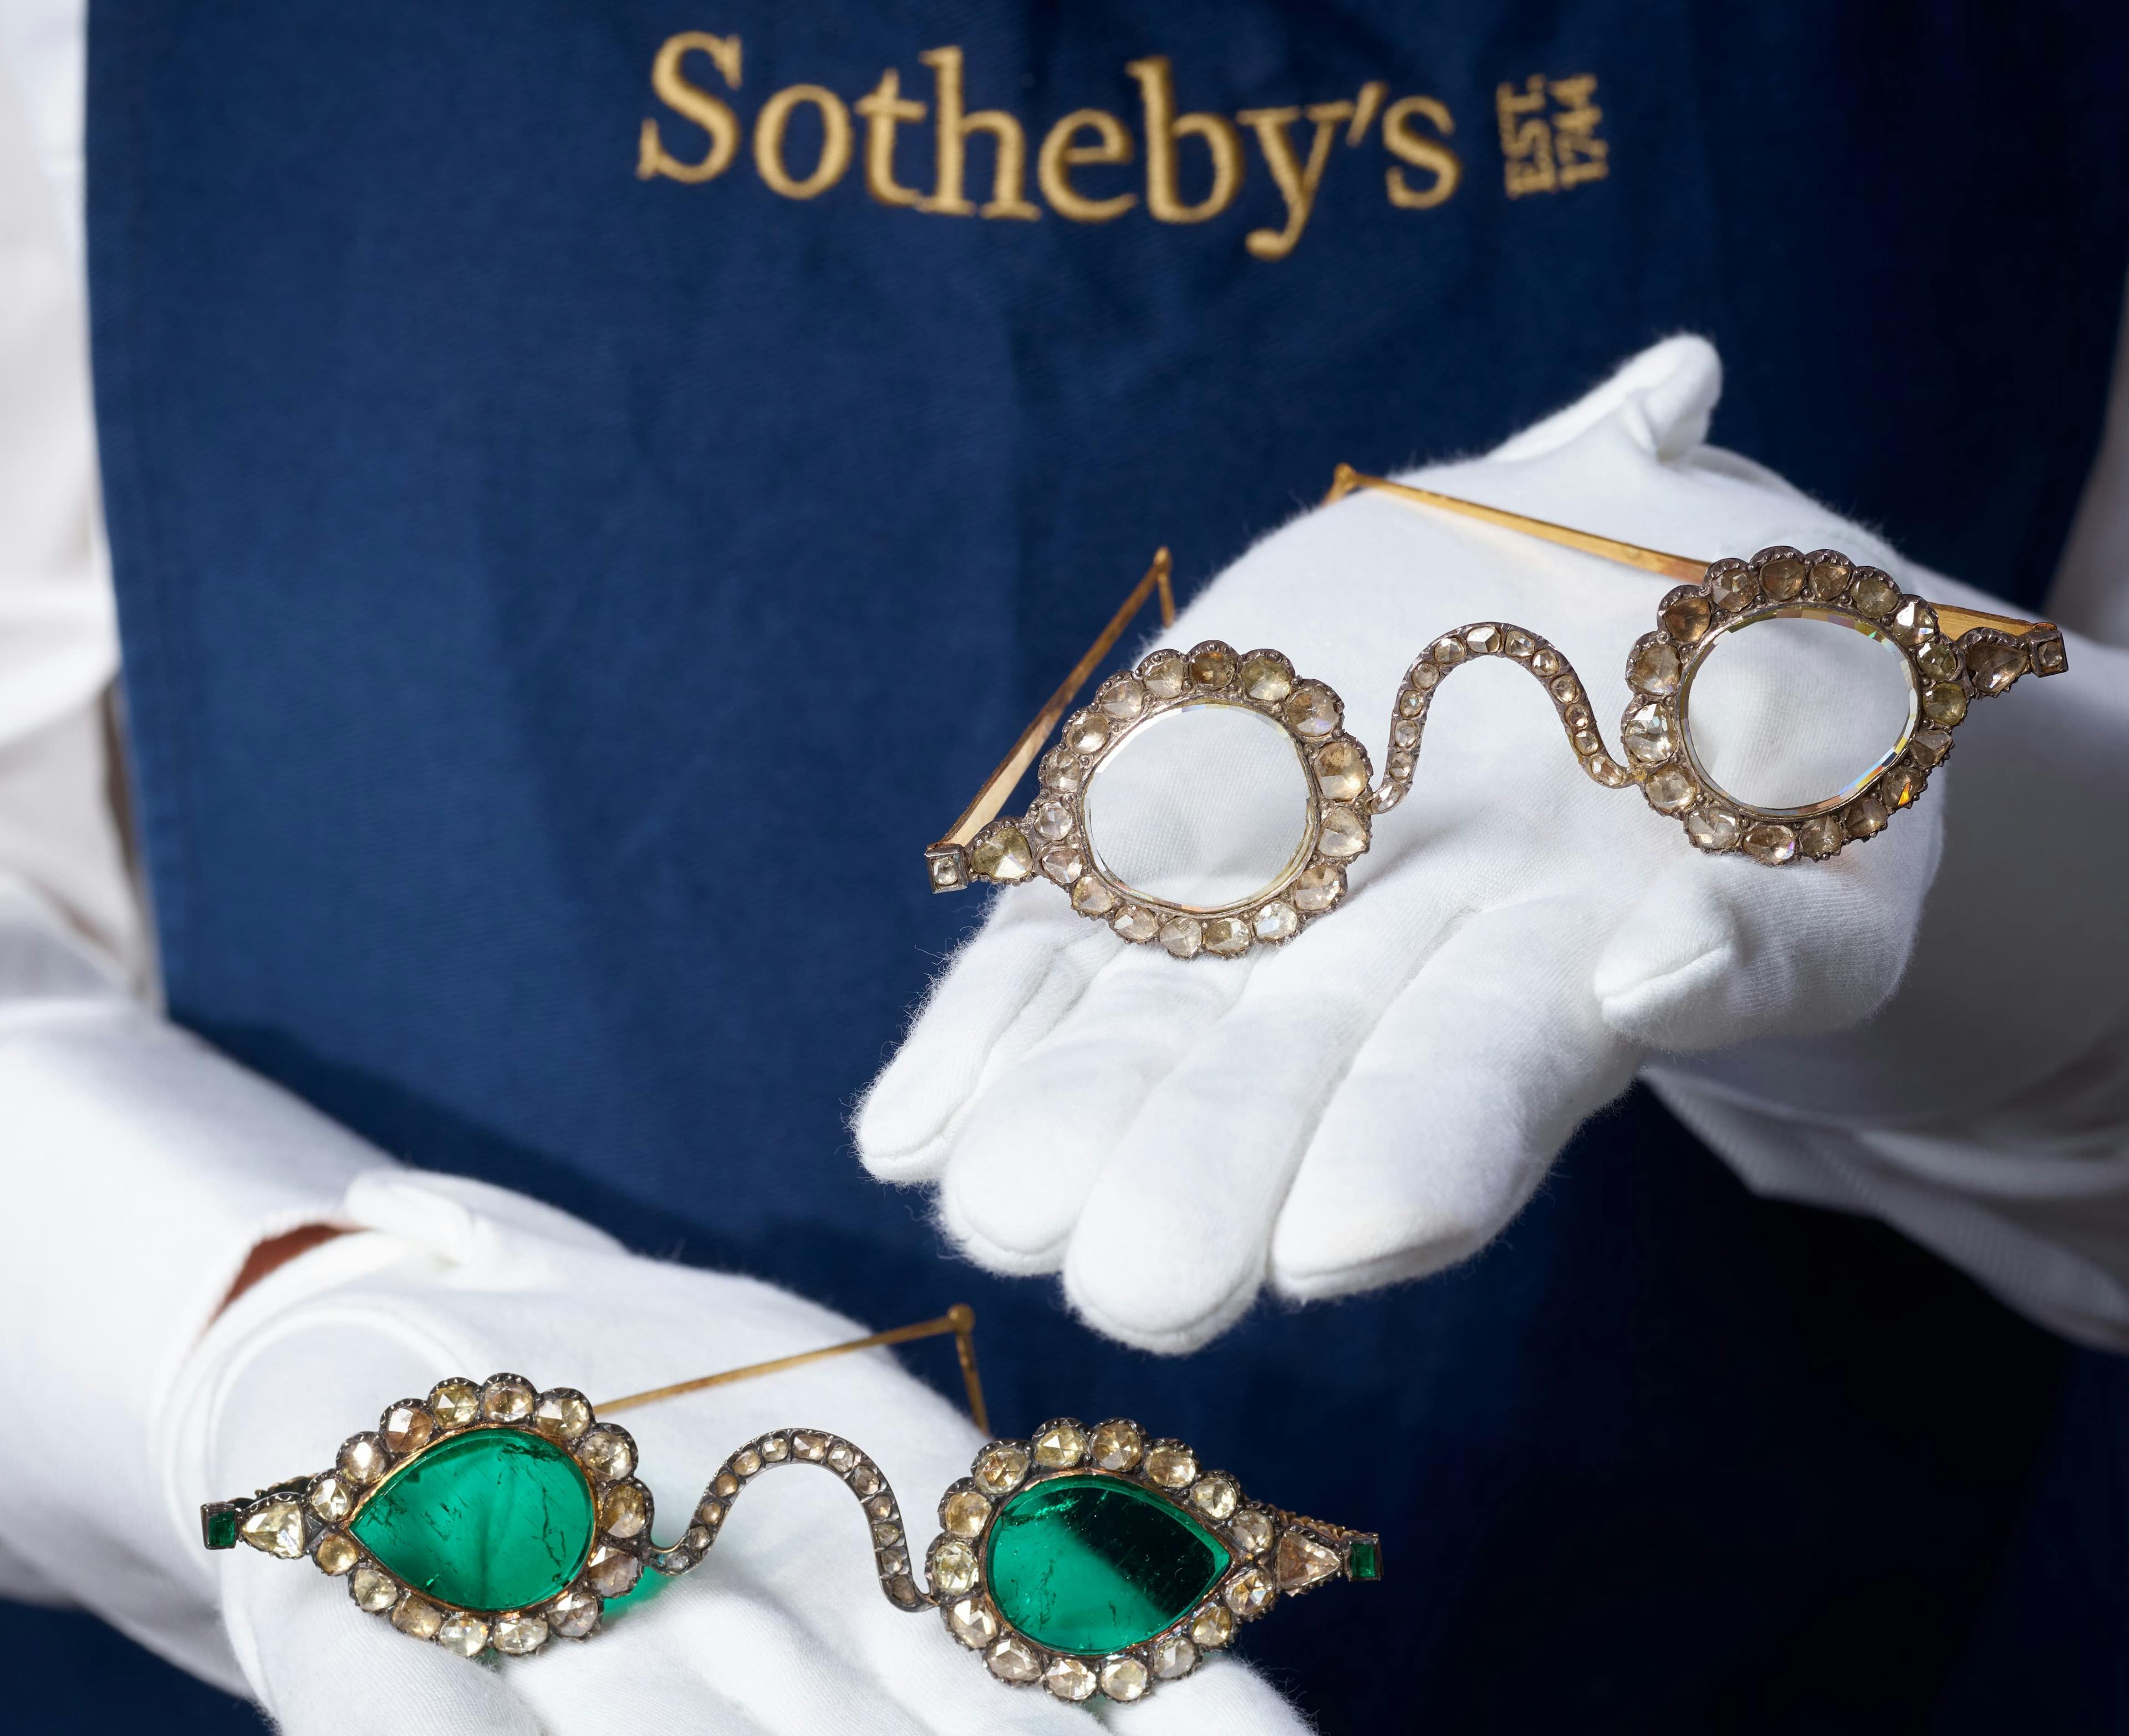 Bejeweled 17th century eyeglasses up for auction at Sotheby’s London